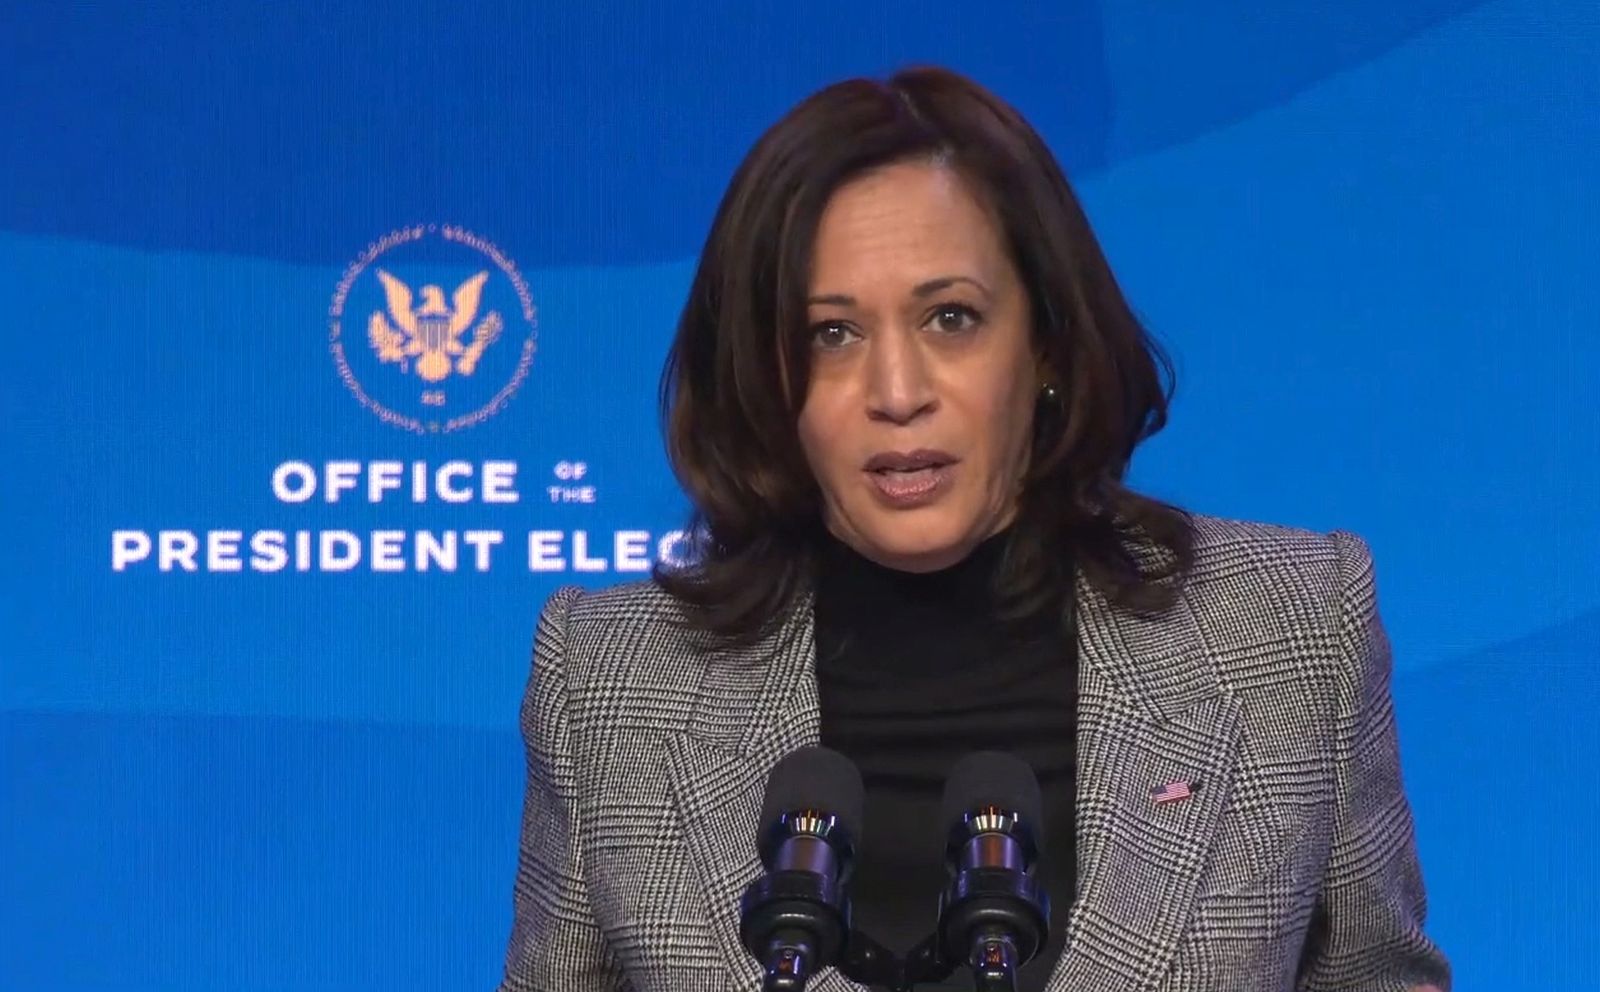 epa08942695 A frame grab from a handout video released by the Office of the President Elect shows US Vice President-Elect Kamala Harris speaking during a press conference in Wilmington, Delaware, USA, 16 January 2021. US President-Elect Joseph R. Biden announced the key members of his science team.  EPA/OFFICE OF THE PRESIDENT ELECT / HANDOUT  HANDOUT EDITORIAL USE ONLY/NO SALES